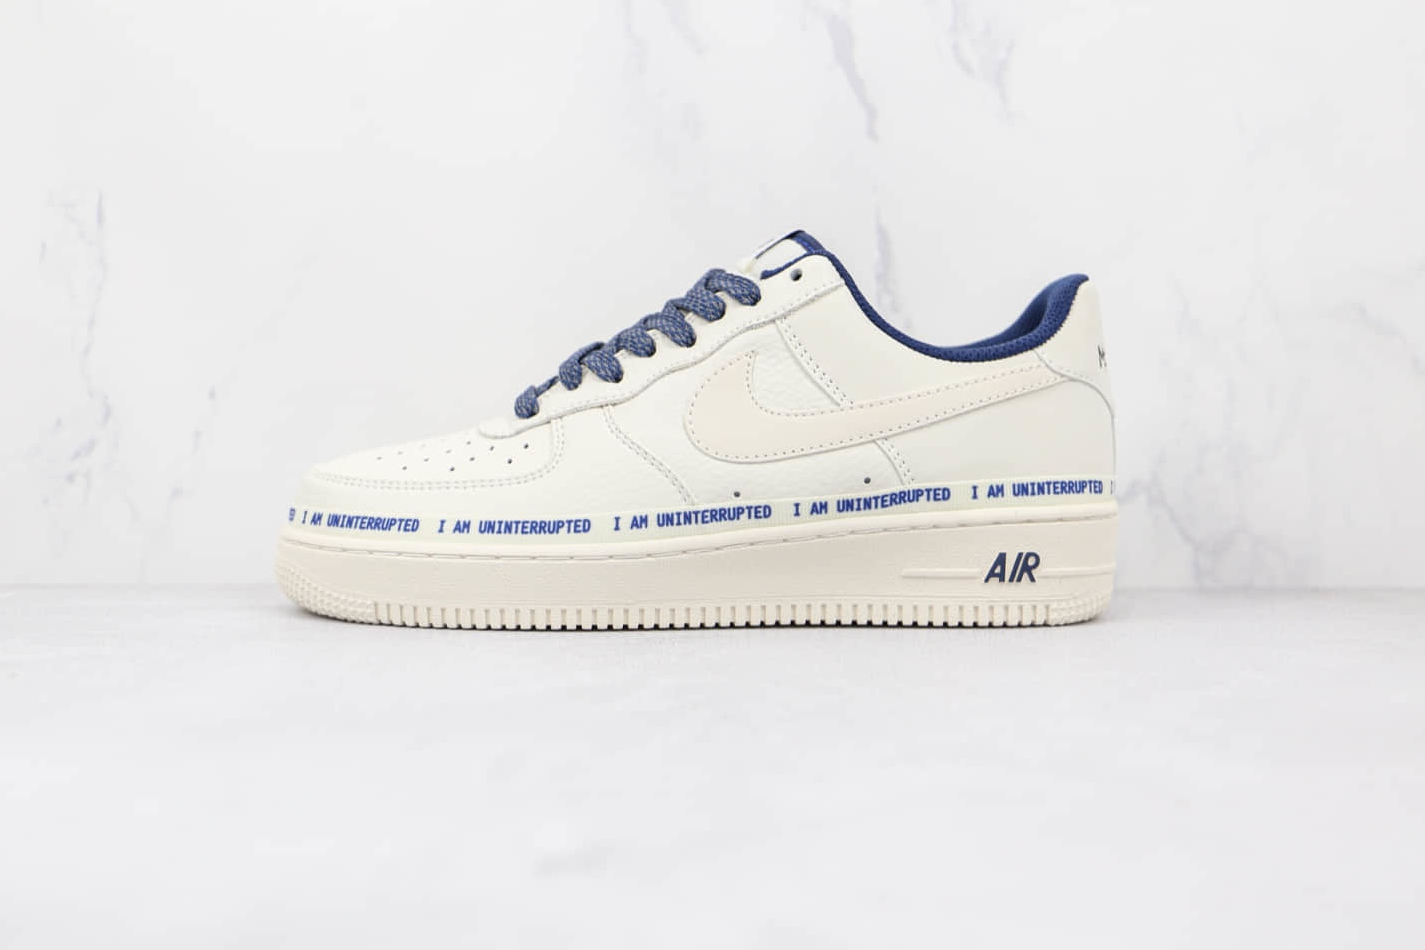 Uninterrupted x Nike Air Force 1 Low White Blue NU6602-301 | Exclusive Collaboration Sneakers